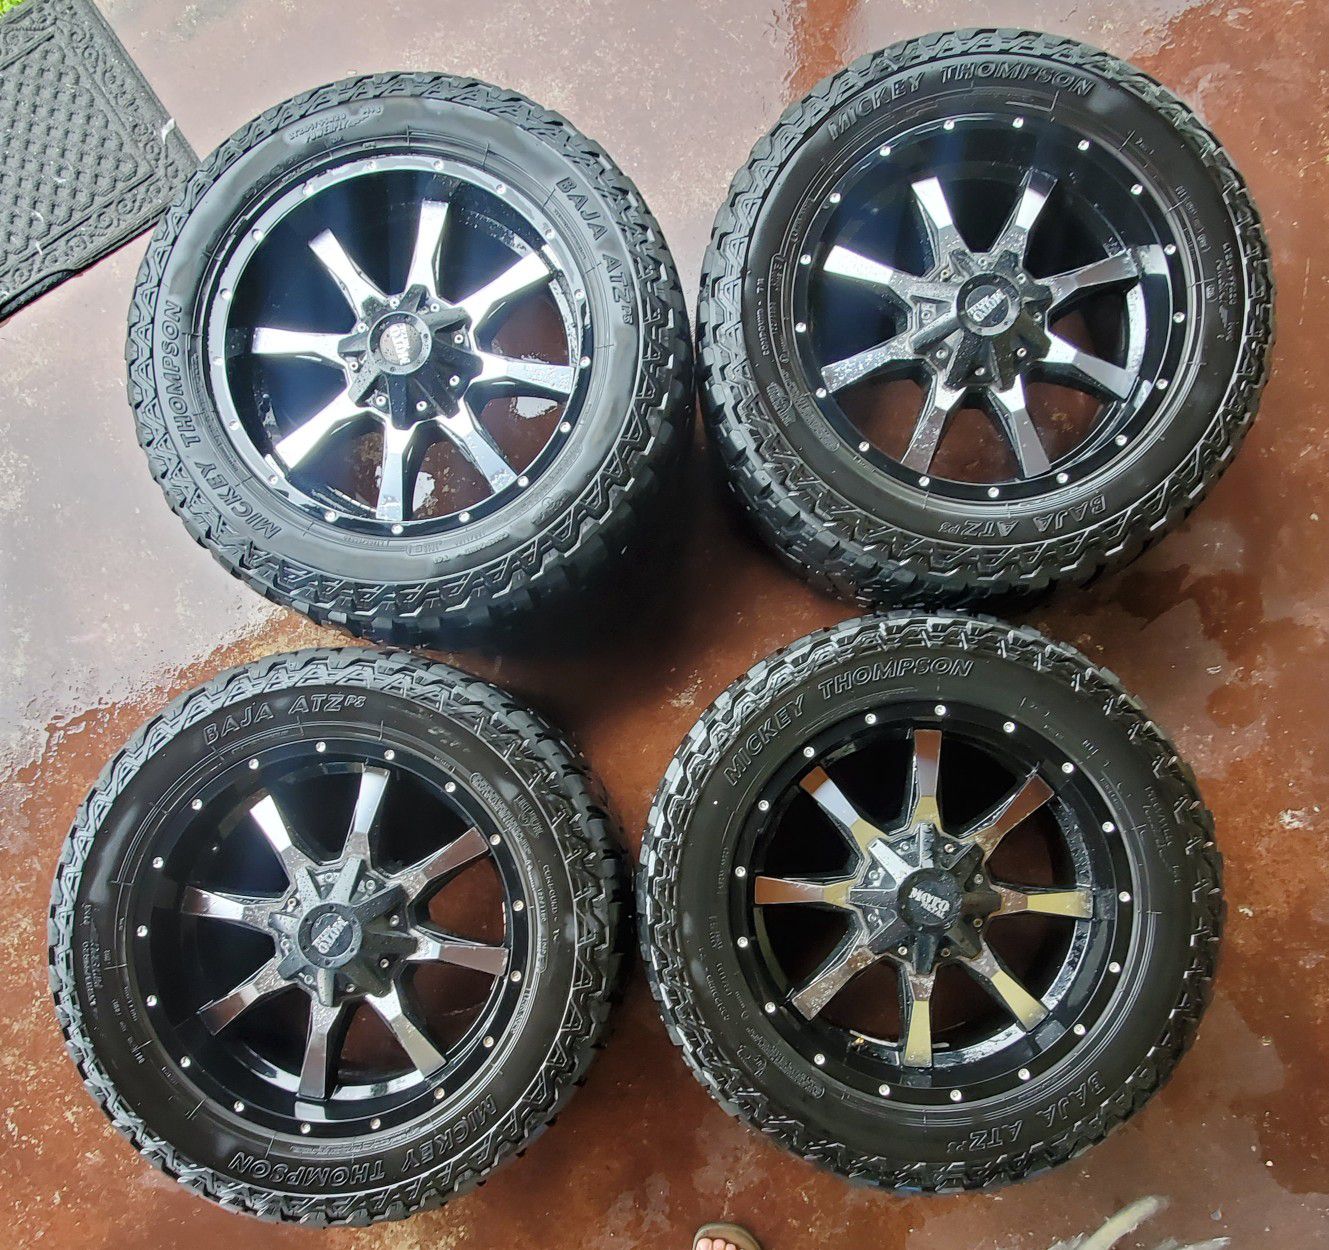 20x9 offroad Mickey Thompson wheels and Moto Metal rims chevy or ford.